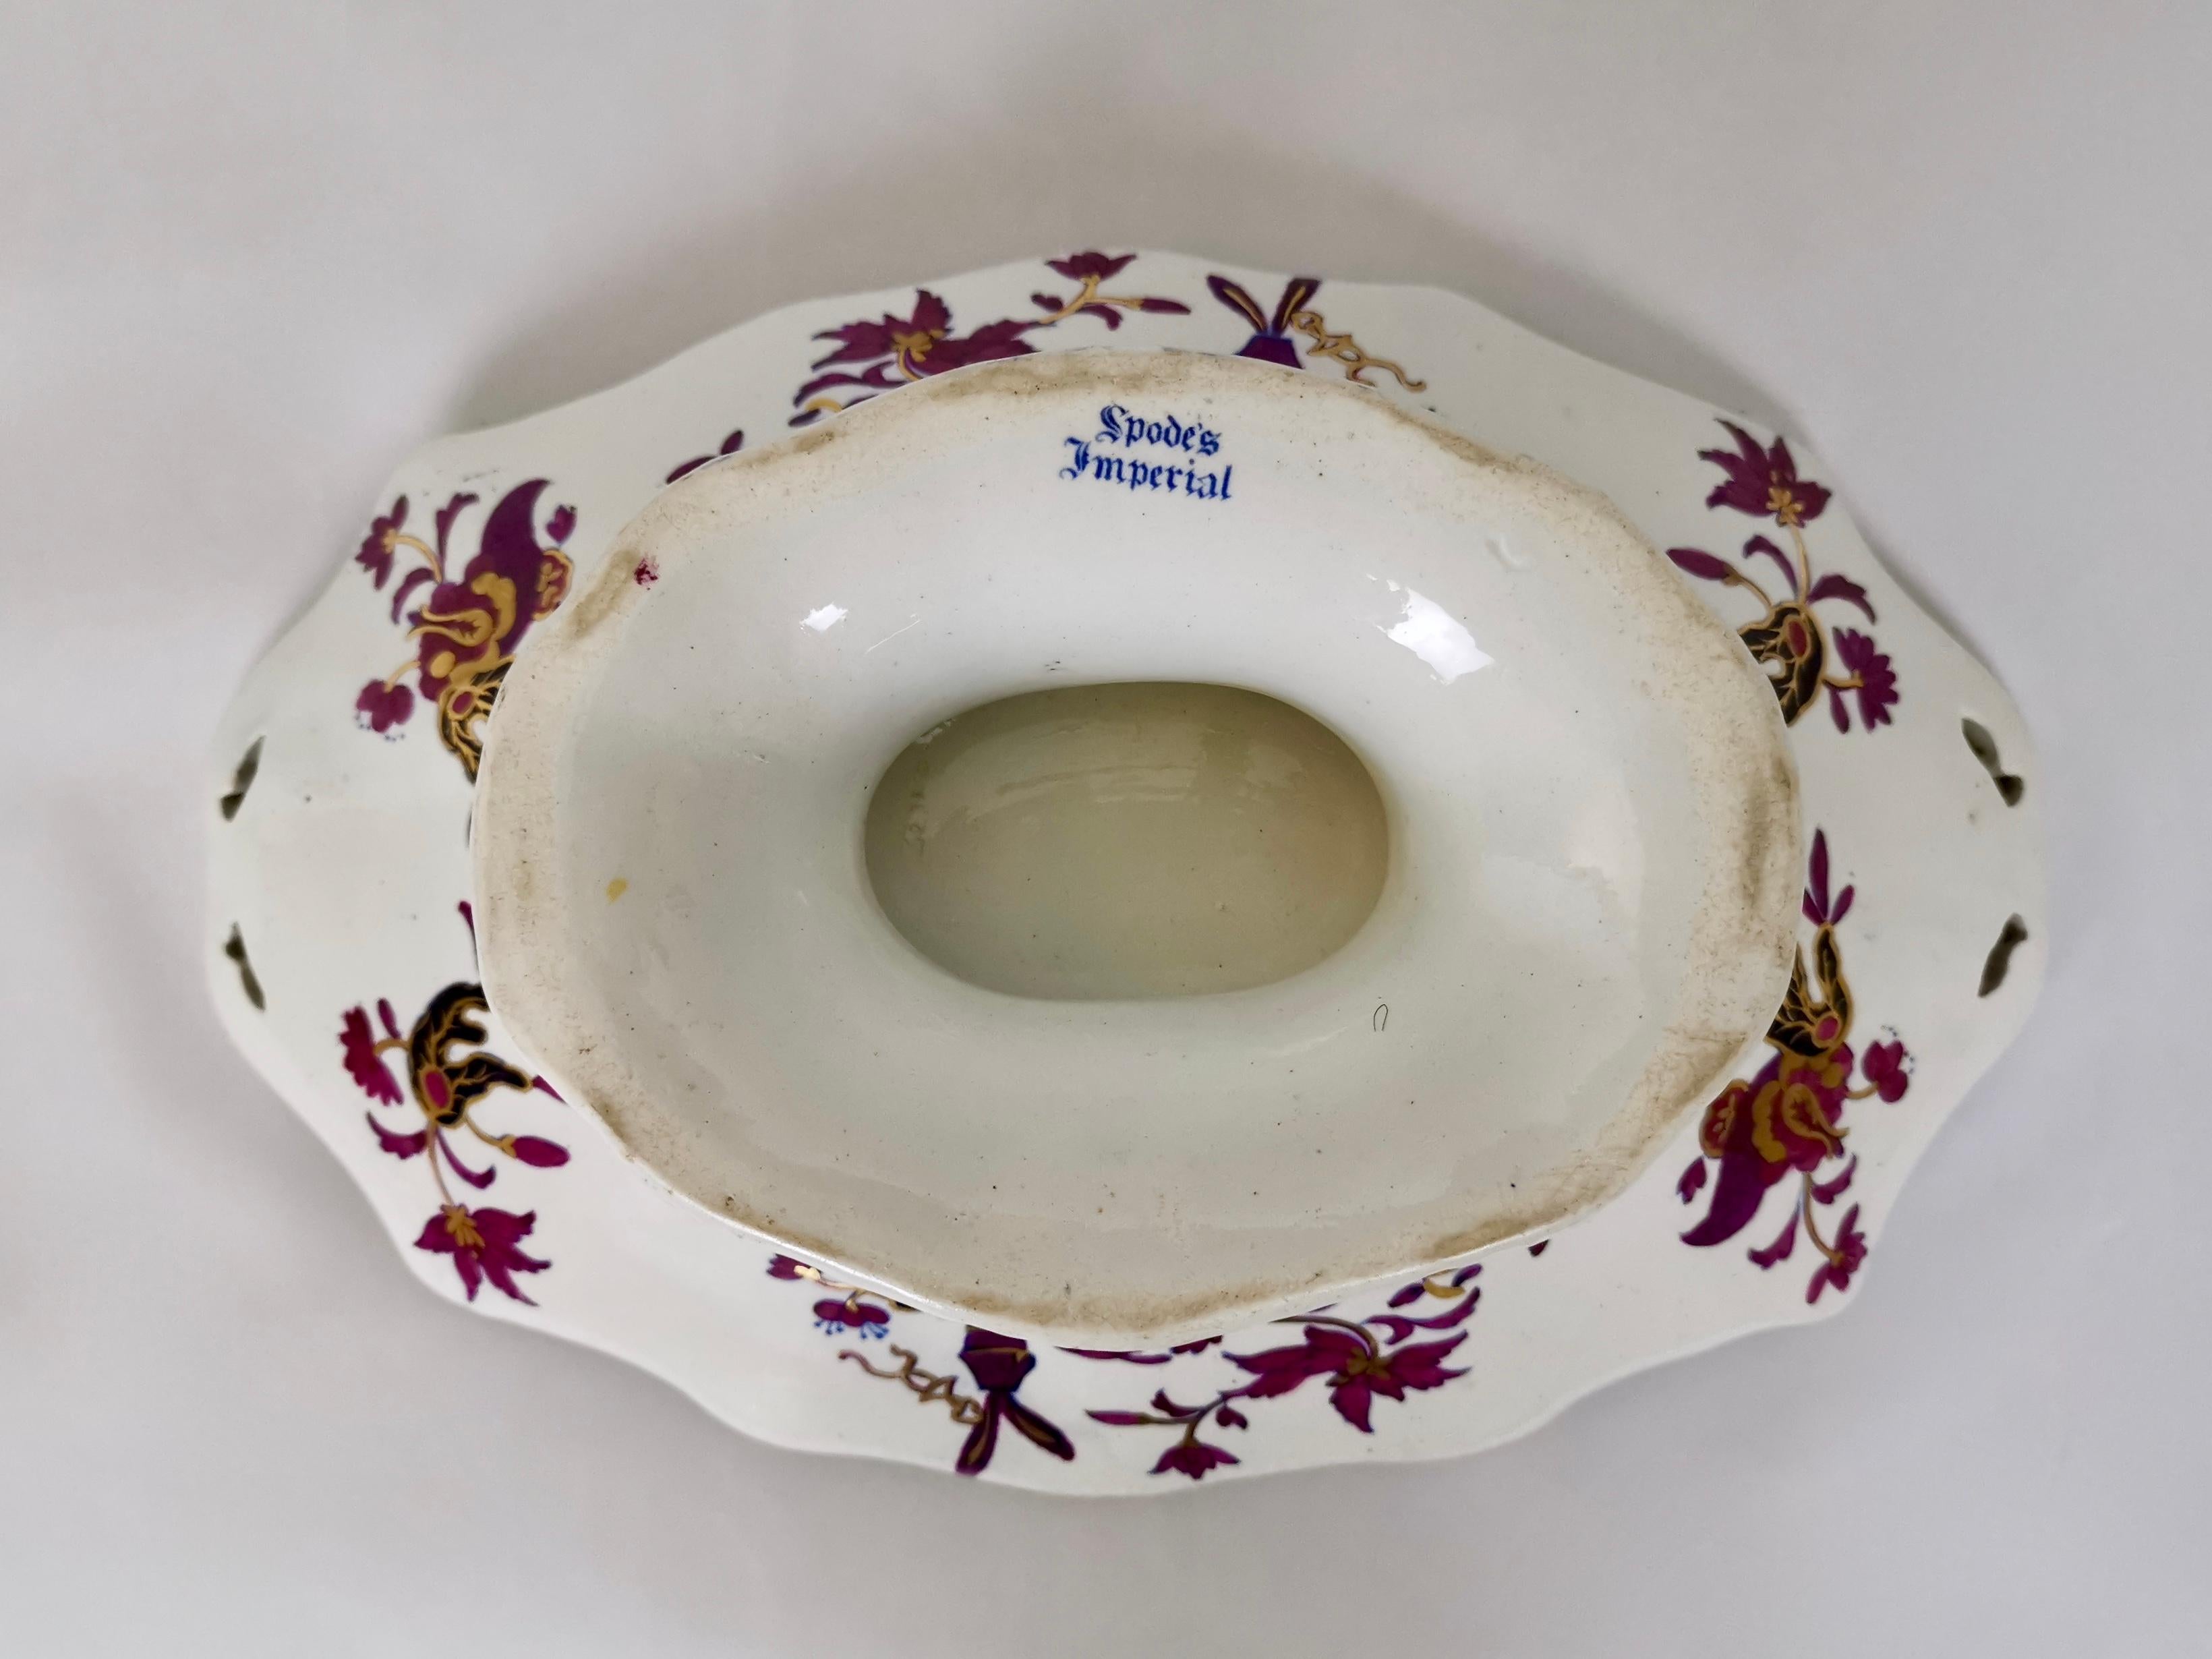 Hand-Painted Spode Imperial China Dessert Service, Frog Pattern in Mauve, Regency circa 1828 For Sale